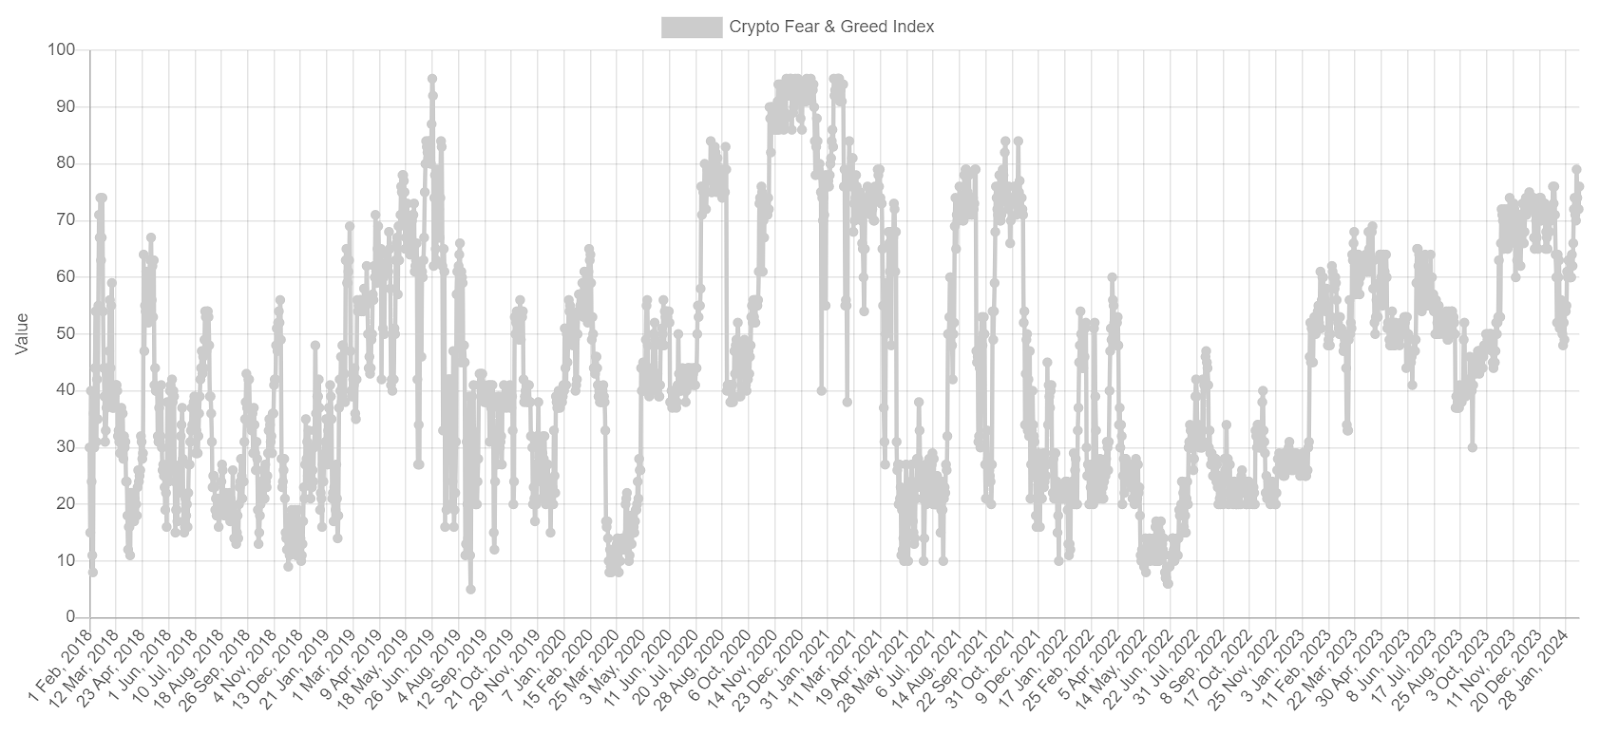 Crypto Fear & Greed Index from 2018 to 2024